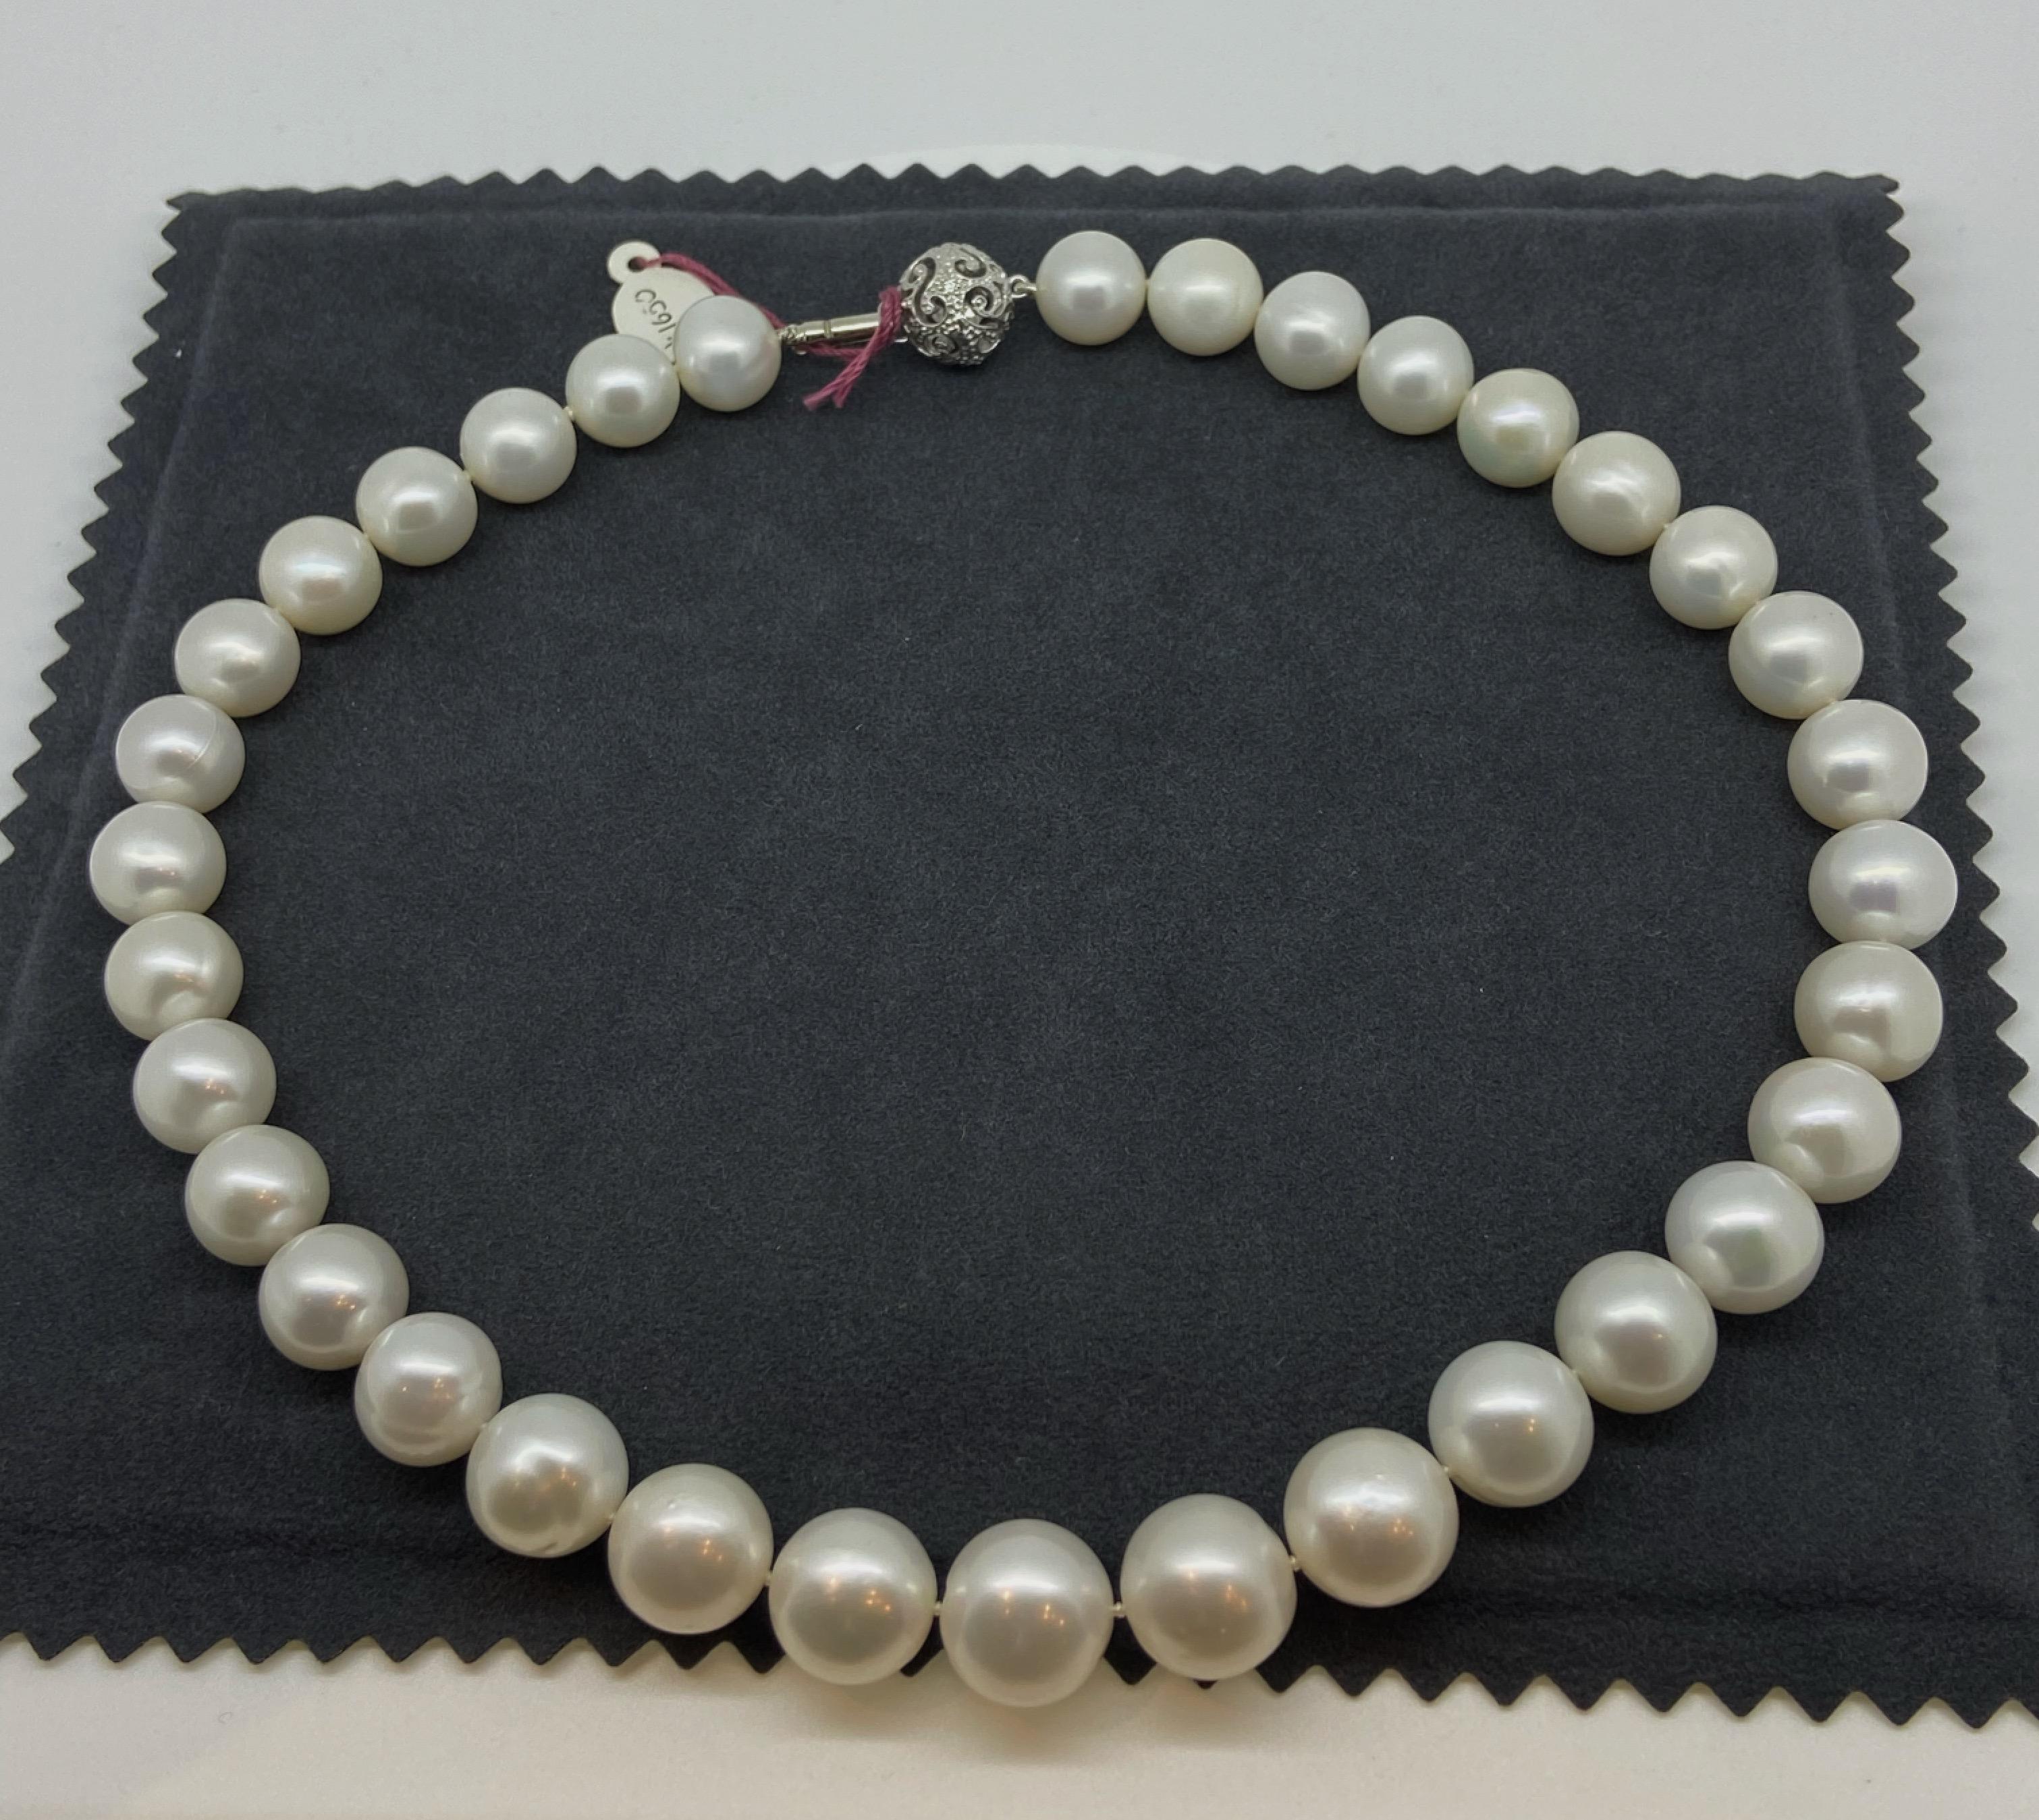 Women's Large 11mm-14mm Cultured Pearl Necklace. Gold & Diamond Clasp. Valued at $4850! For Sale